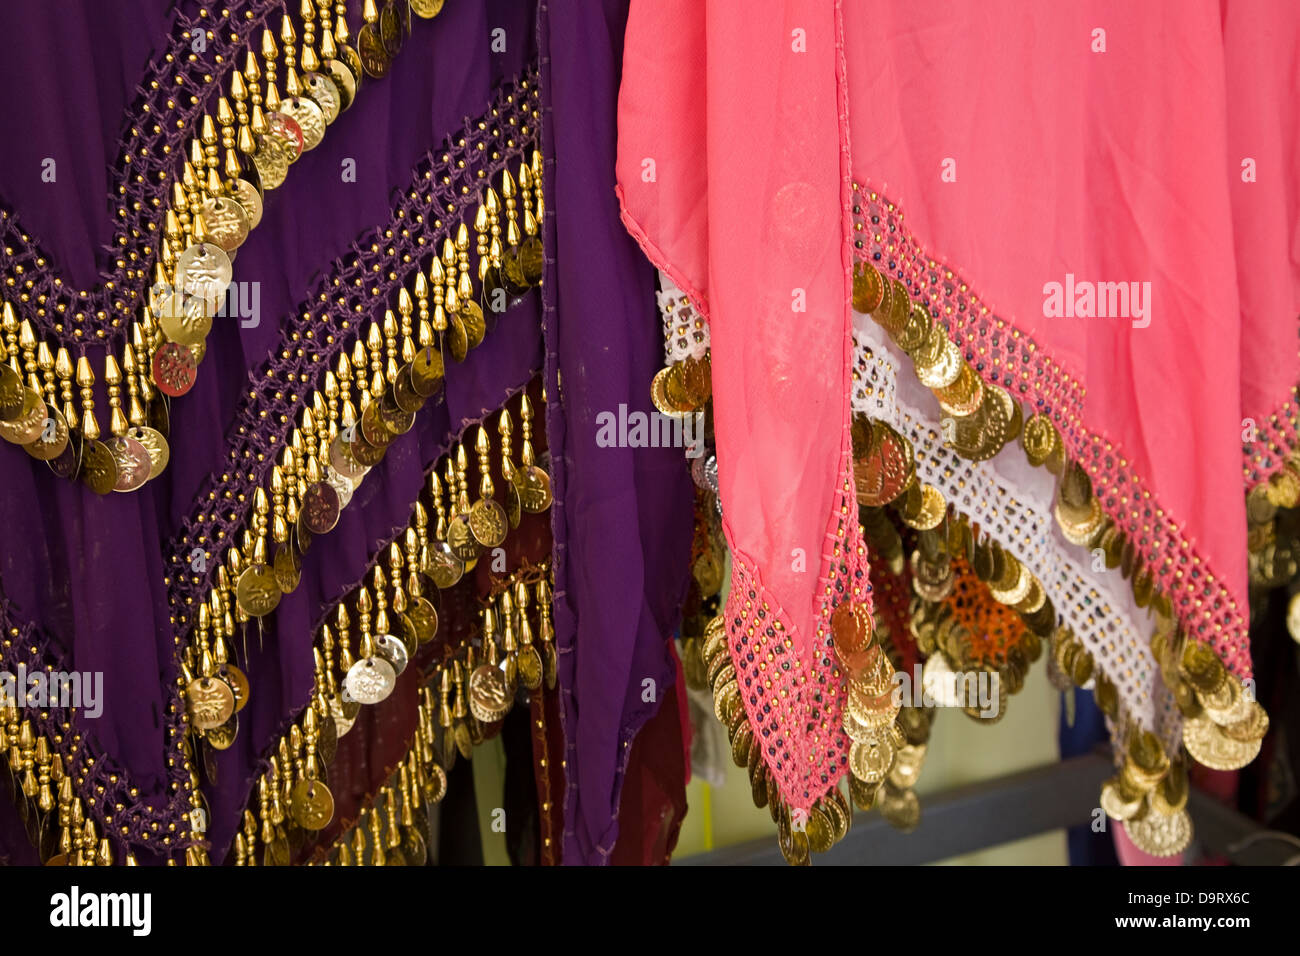 Colorful costumes are featured at this tourist shop in Chania, Crete, Greece. Stock Photo